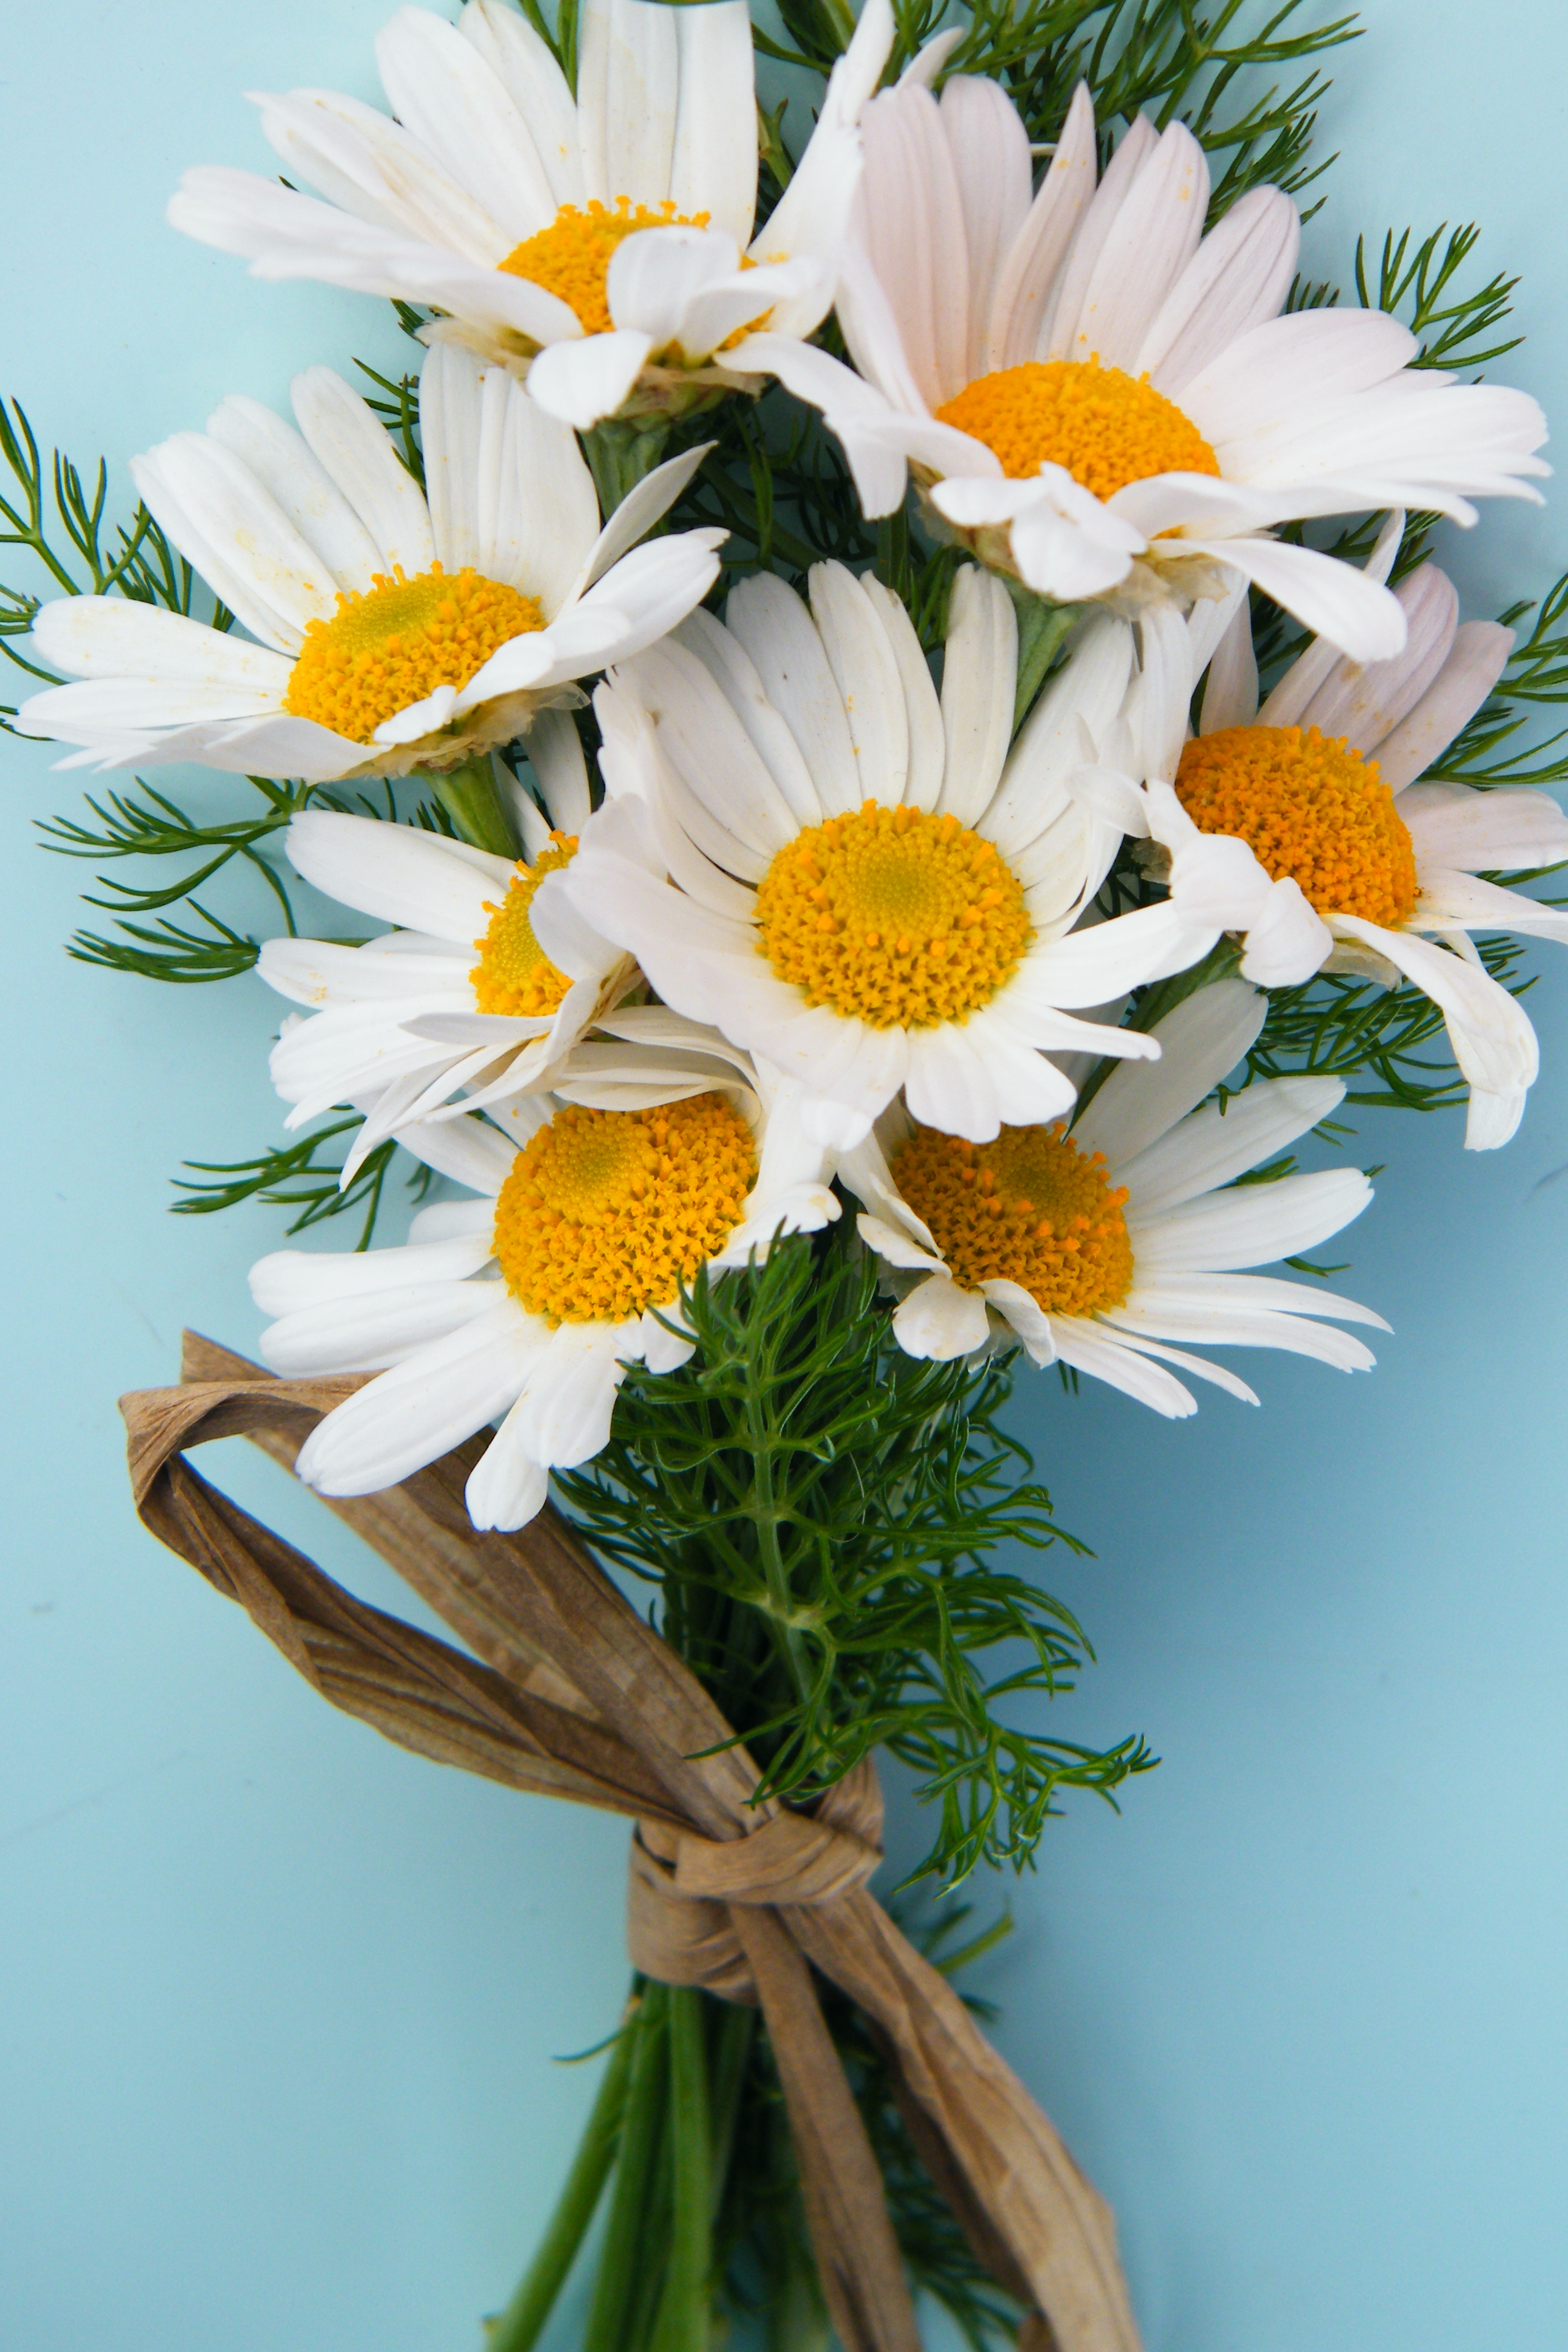 Air drying a daisy bunch | Dried Flower Crafts